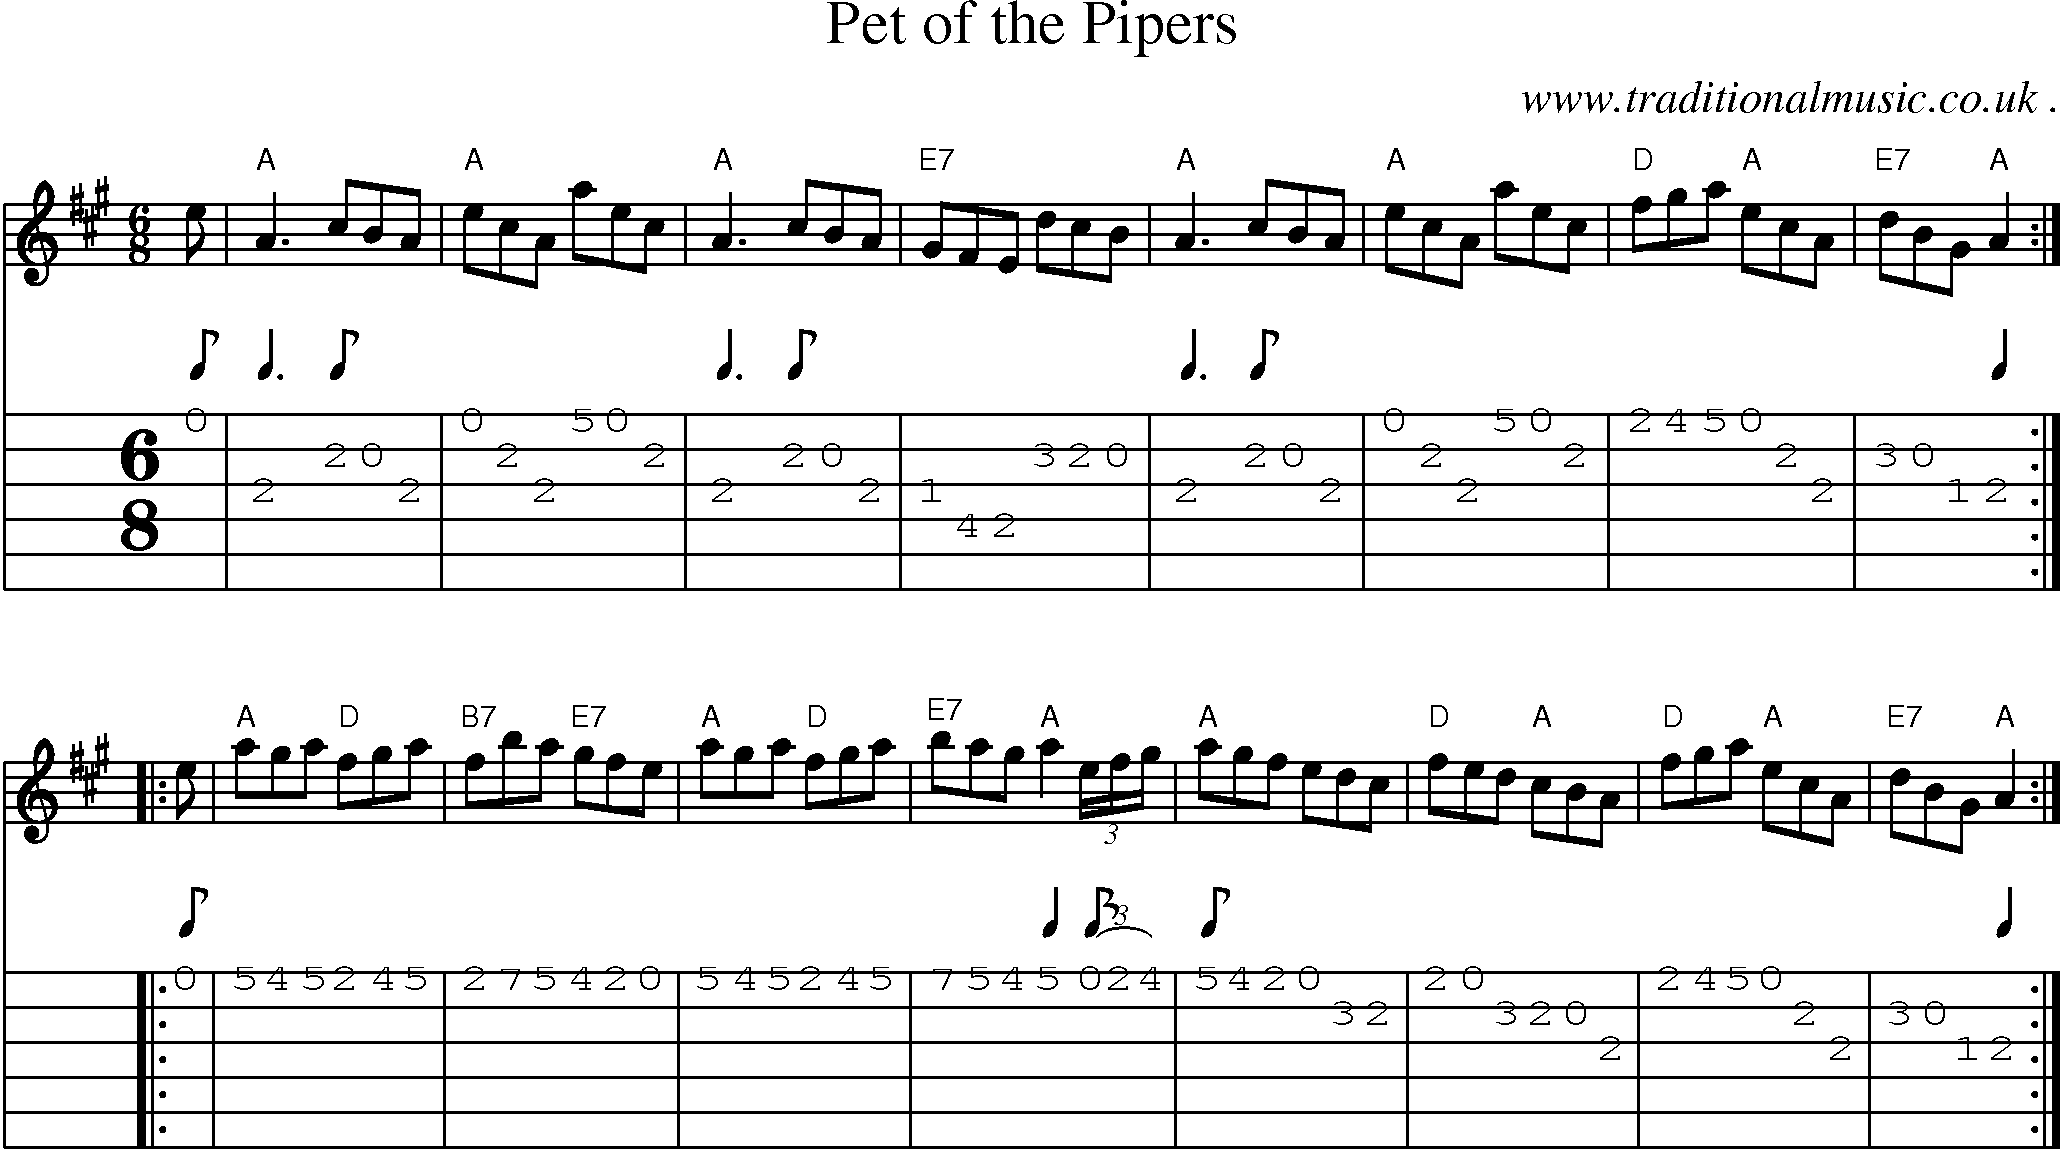 Sheet-music  score, Chords and Guitar Tabs for Pet Of The Pipers